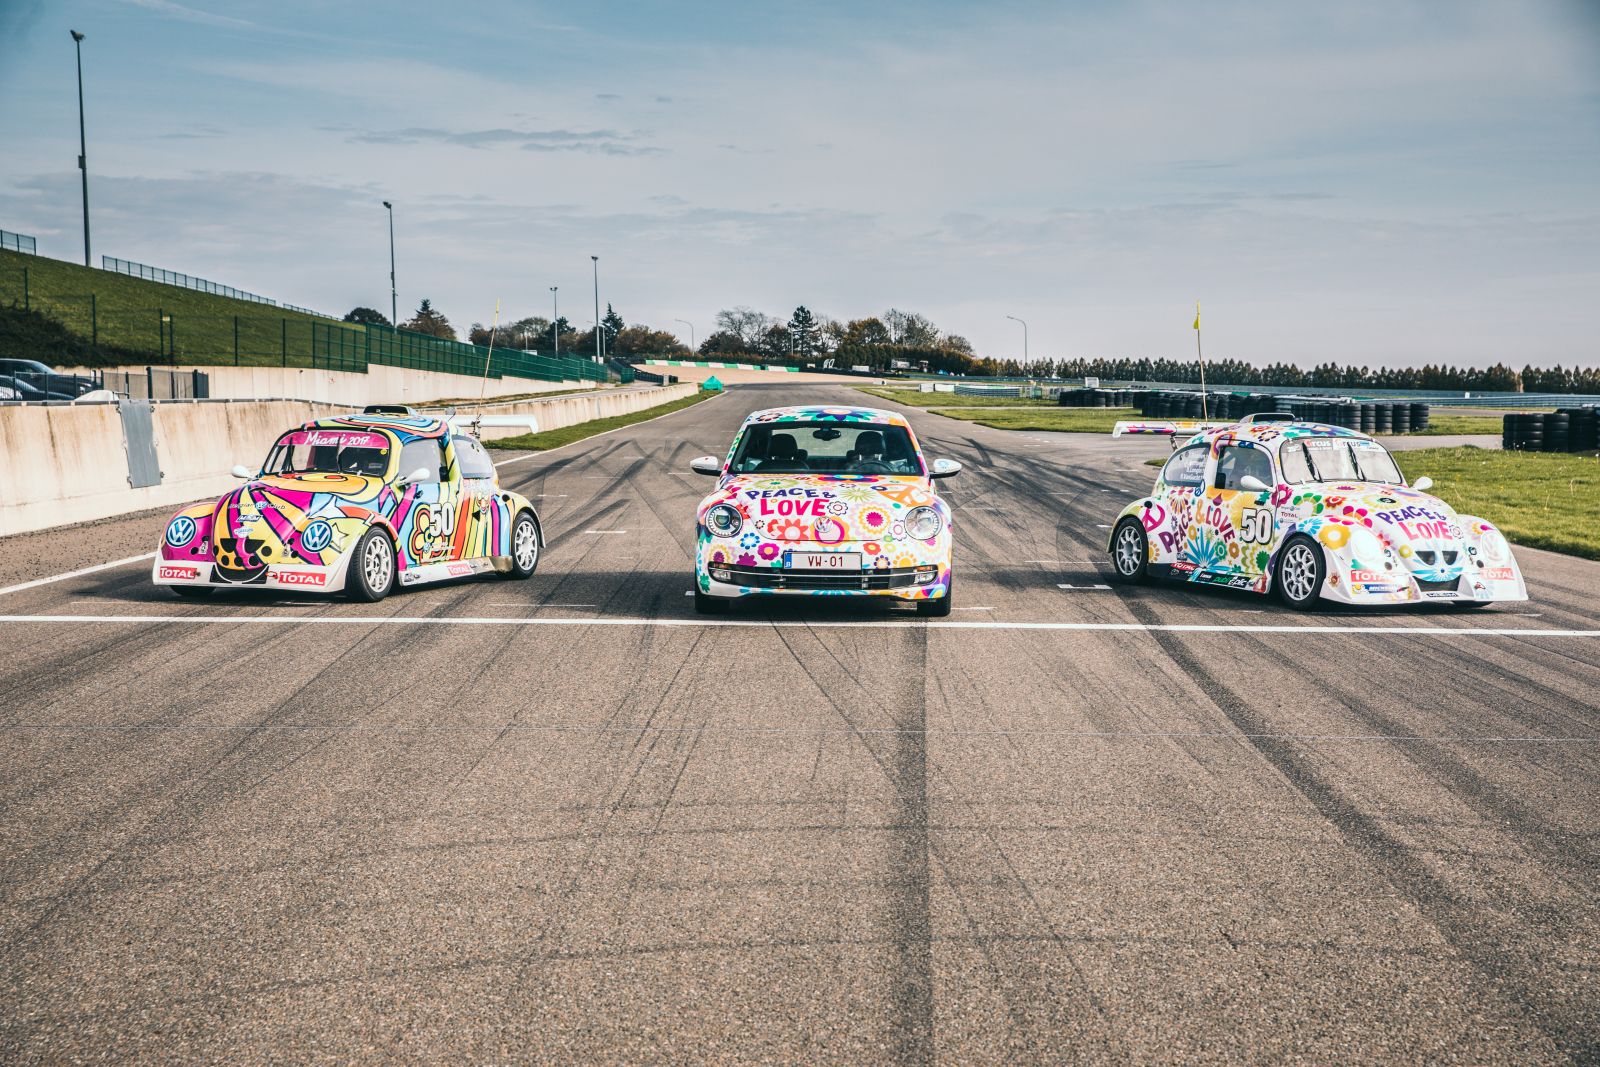 image 1 - Test & Discovery Day : ontdek de VW Fun Cup in Mettet!